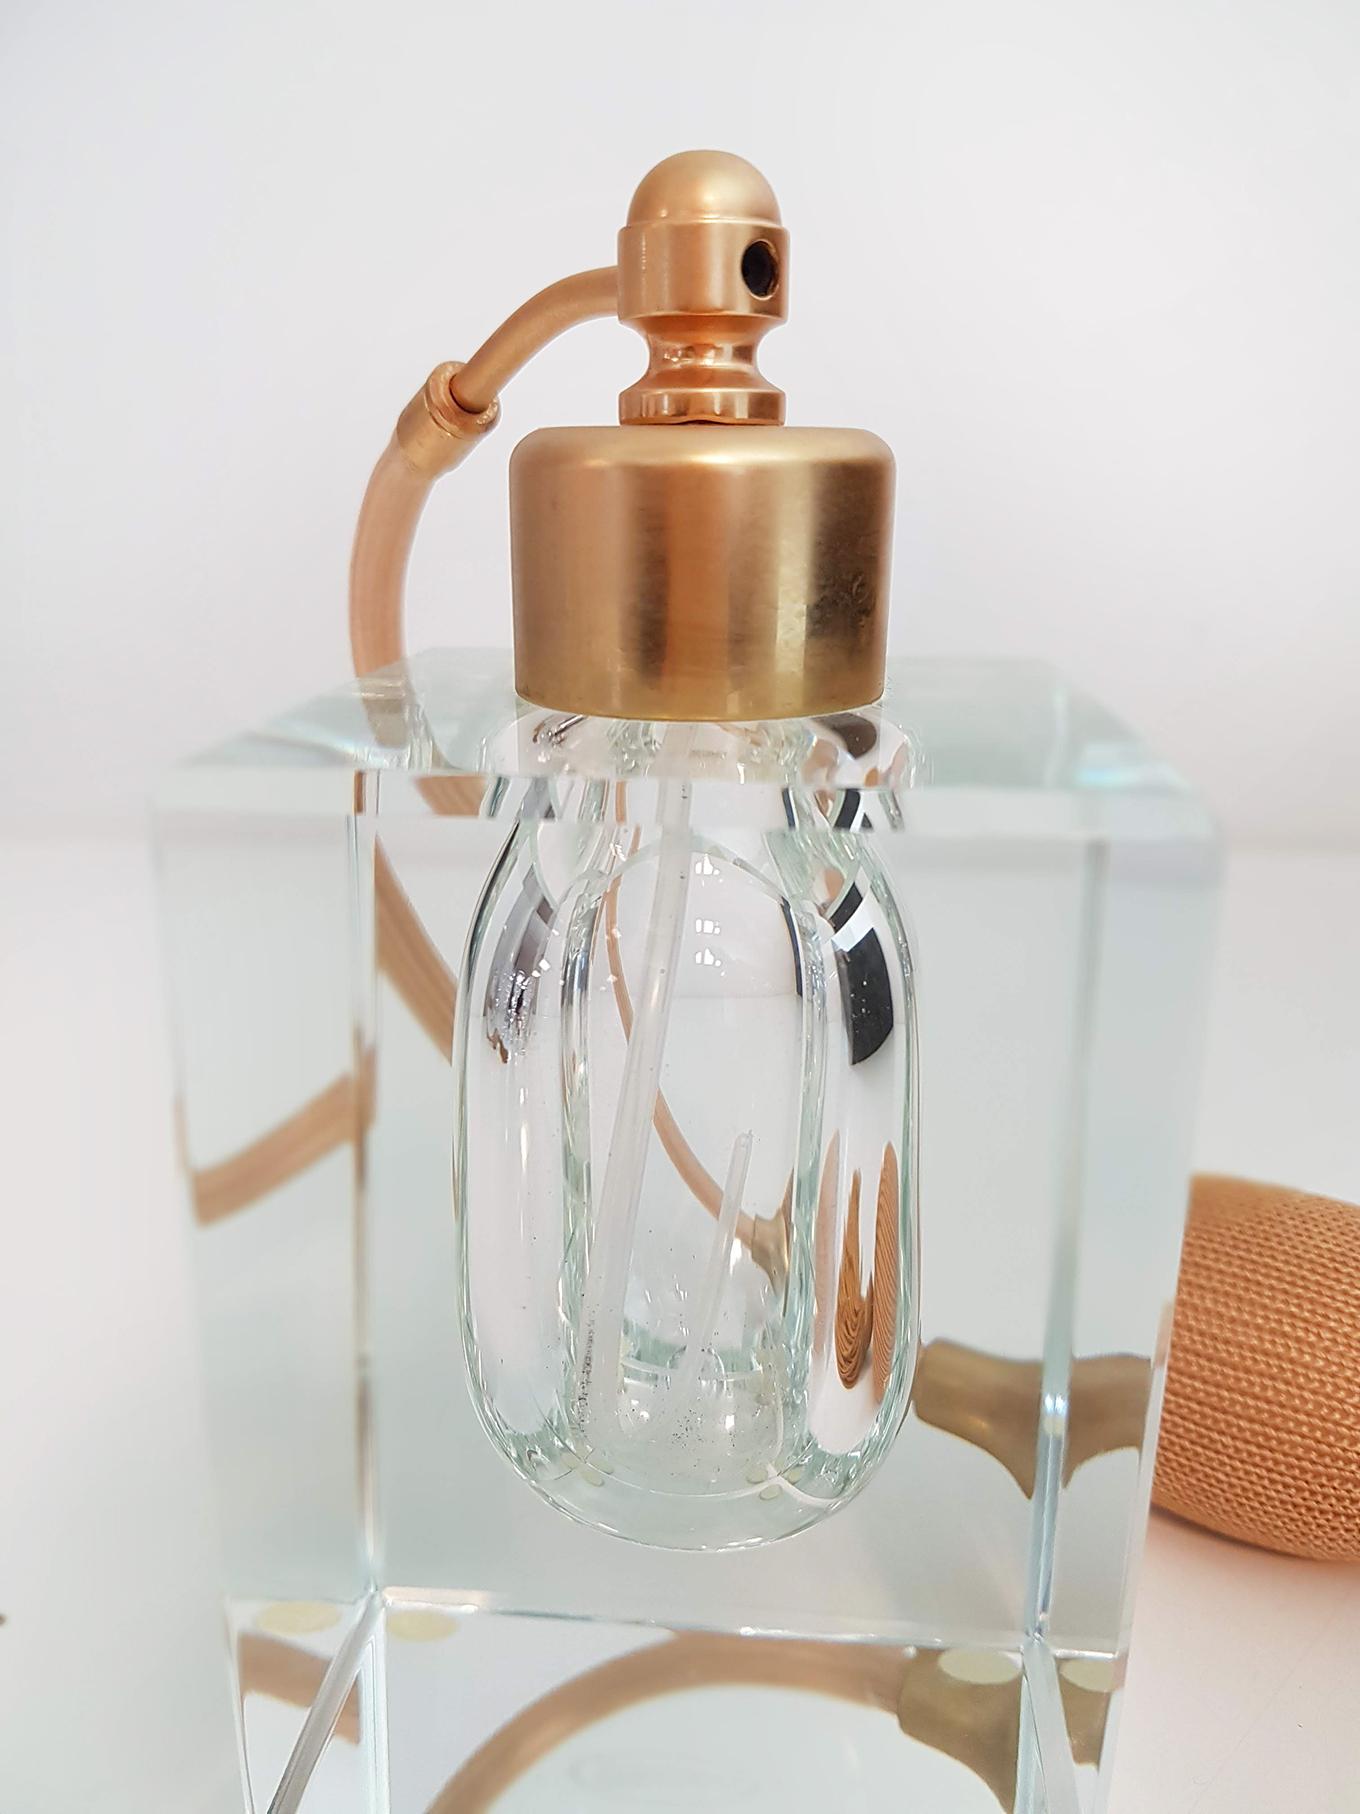 Perfume bottle with anomiser by maker Moser. Origin: Czechoslovakia.
We offer also another model (see last images)
Measures:
H 5.9 (15 cm ) x W 3 inch (7.5 cm) square.

Excellent vintage condition.